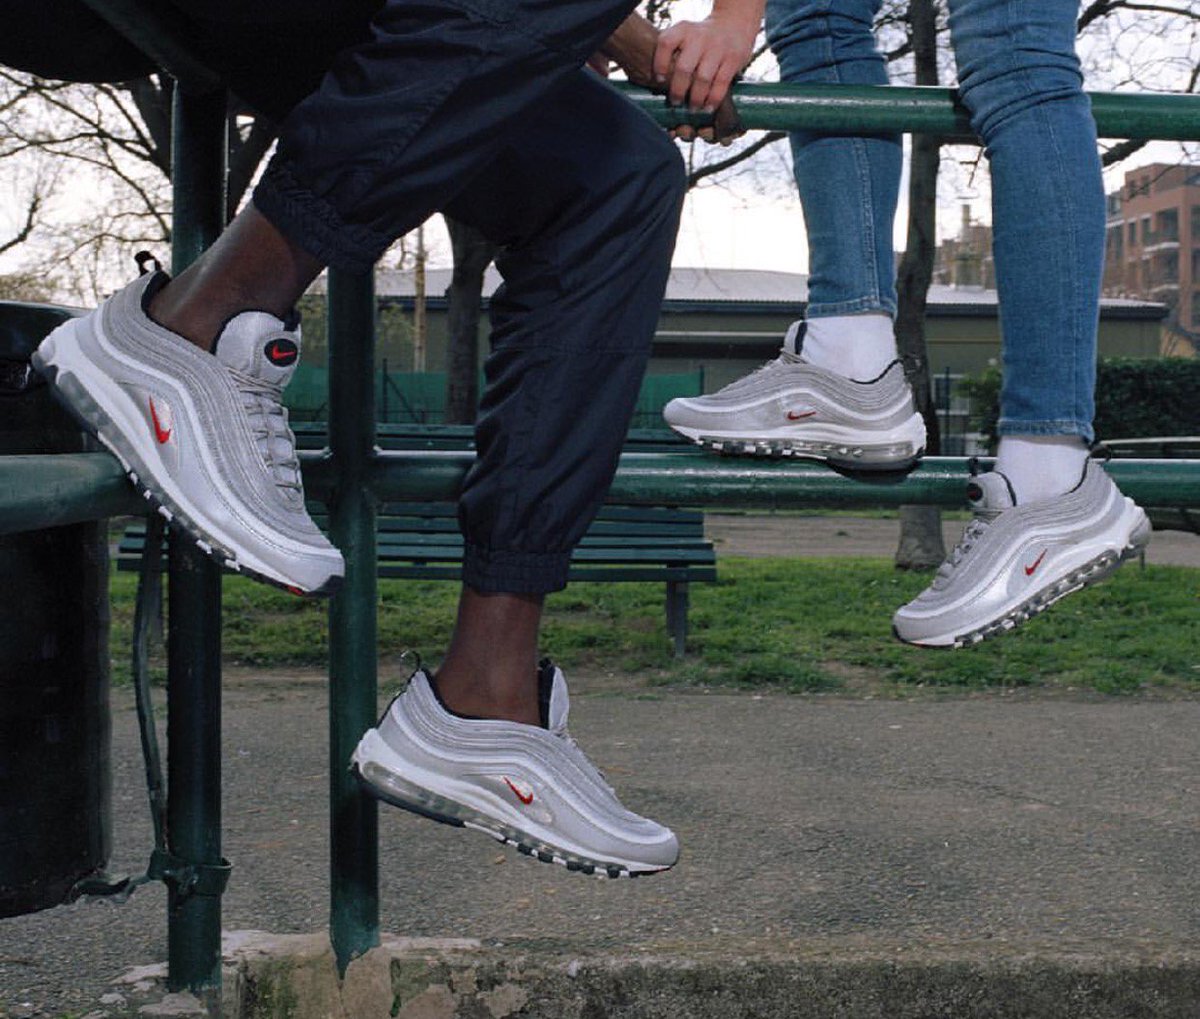 Slecht Willen soort Foot Locker Canada on Twitter: "The Nike Air Max 97 Silver Bullet is now  available in men's and ladies in select stores and online here:  https://t.co/pOjqZyOTih #Approved https://t.co/SHnPsbrusF" / X